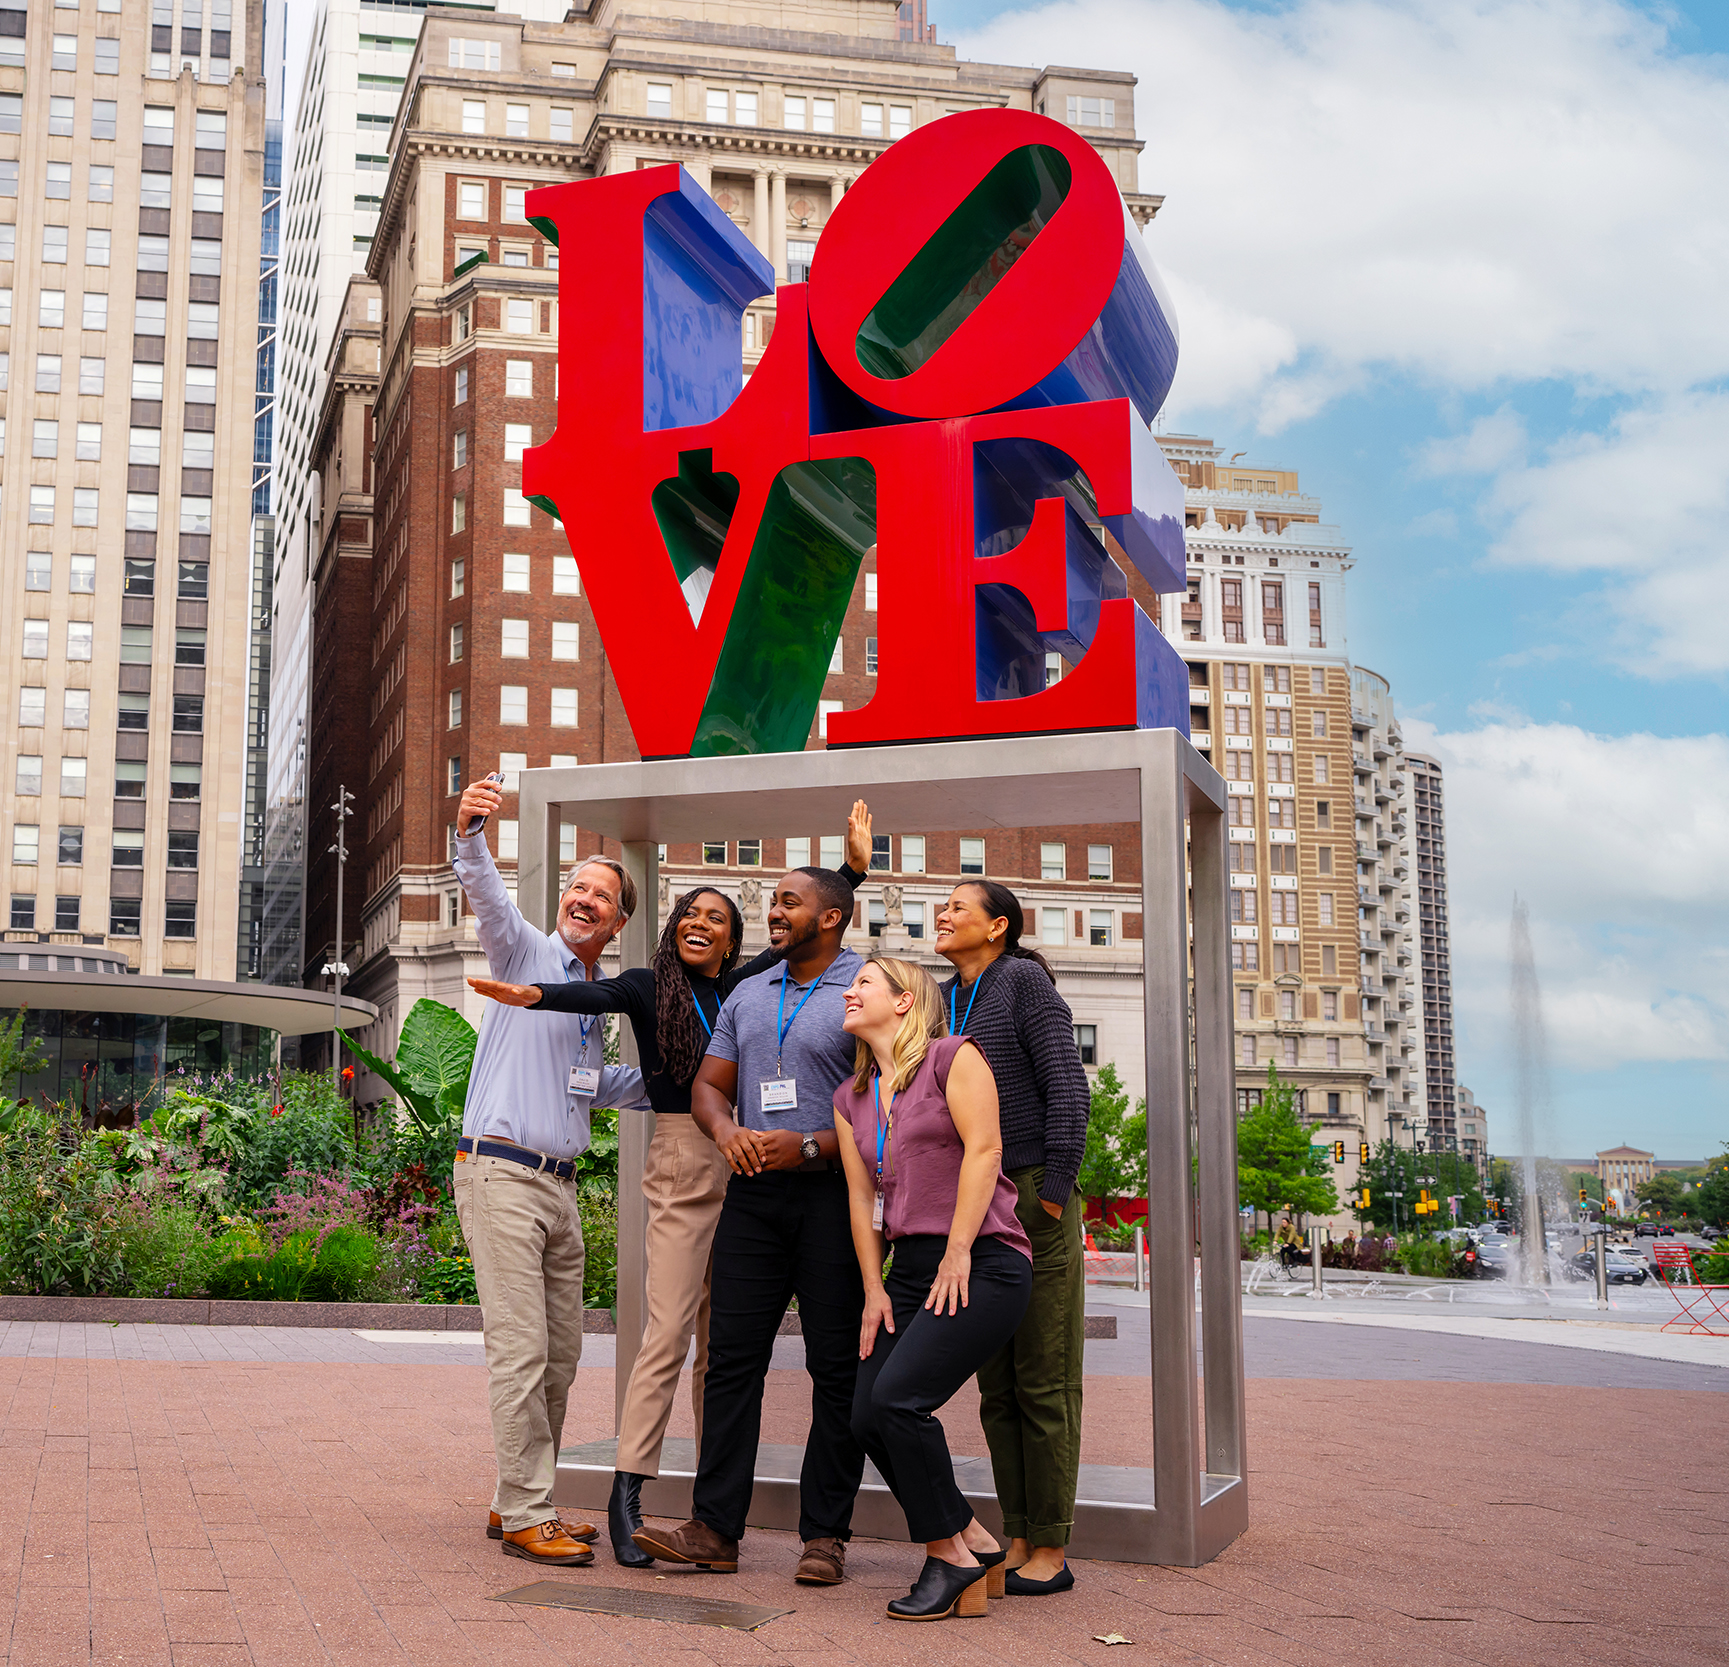 A group of people wearing convention badges pose for a selfie in front of the LOVE statue.